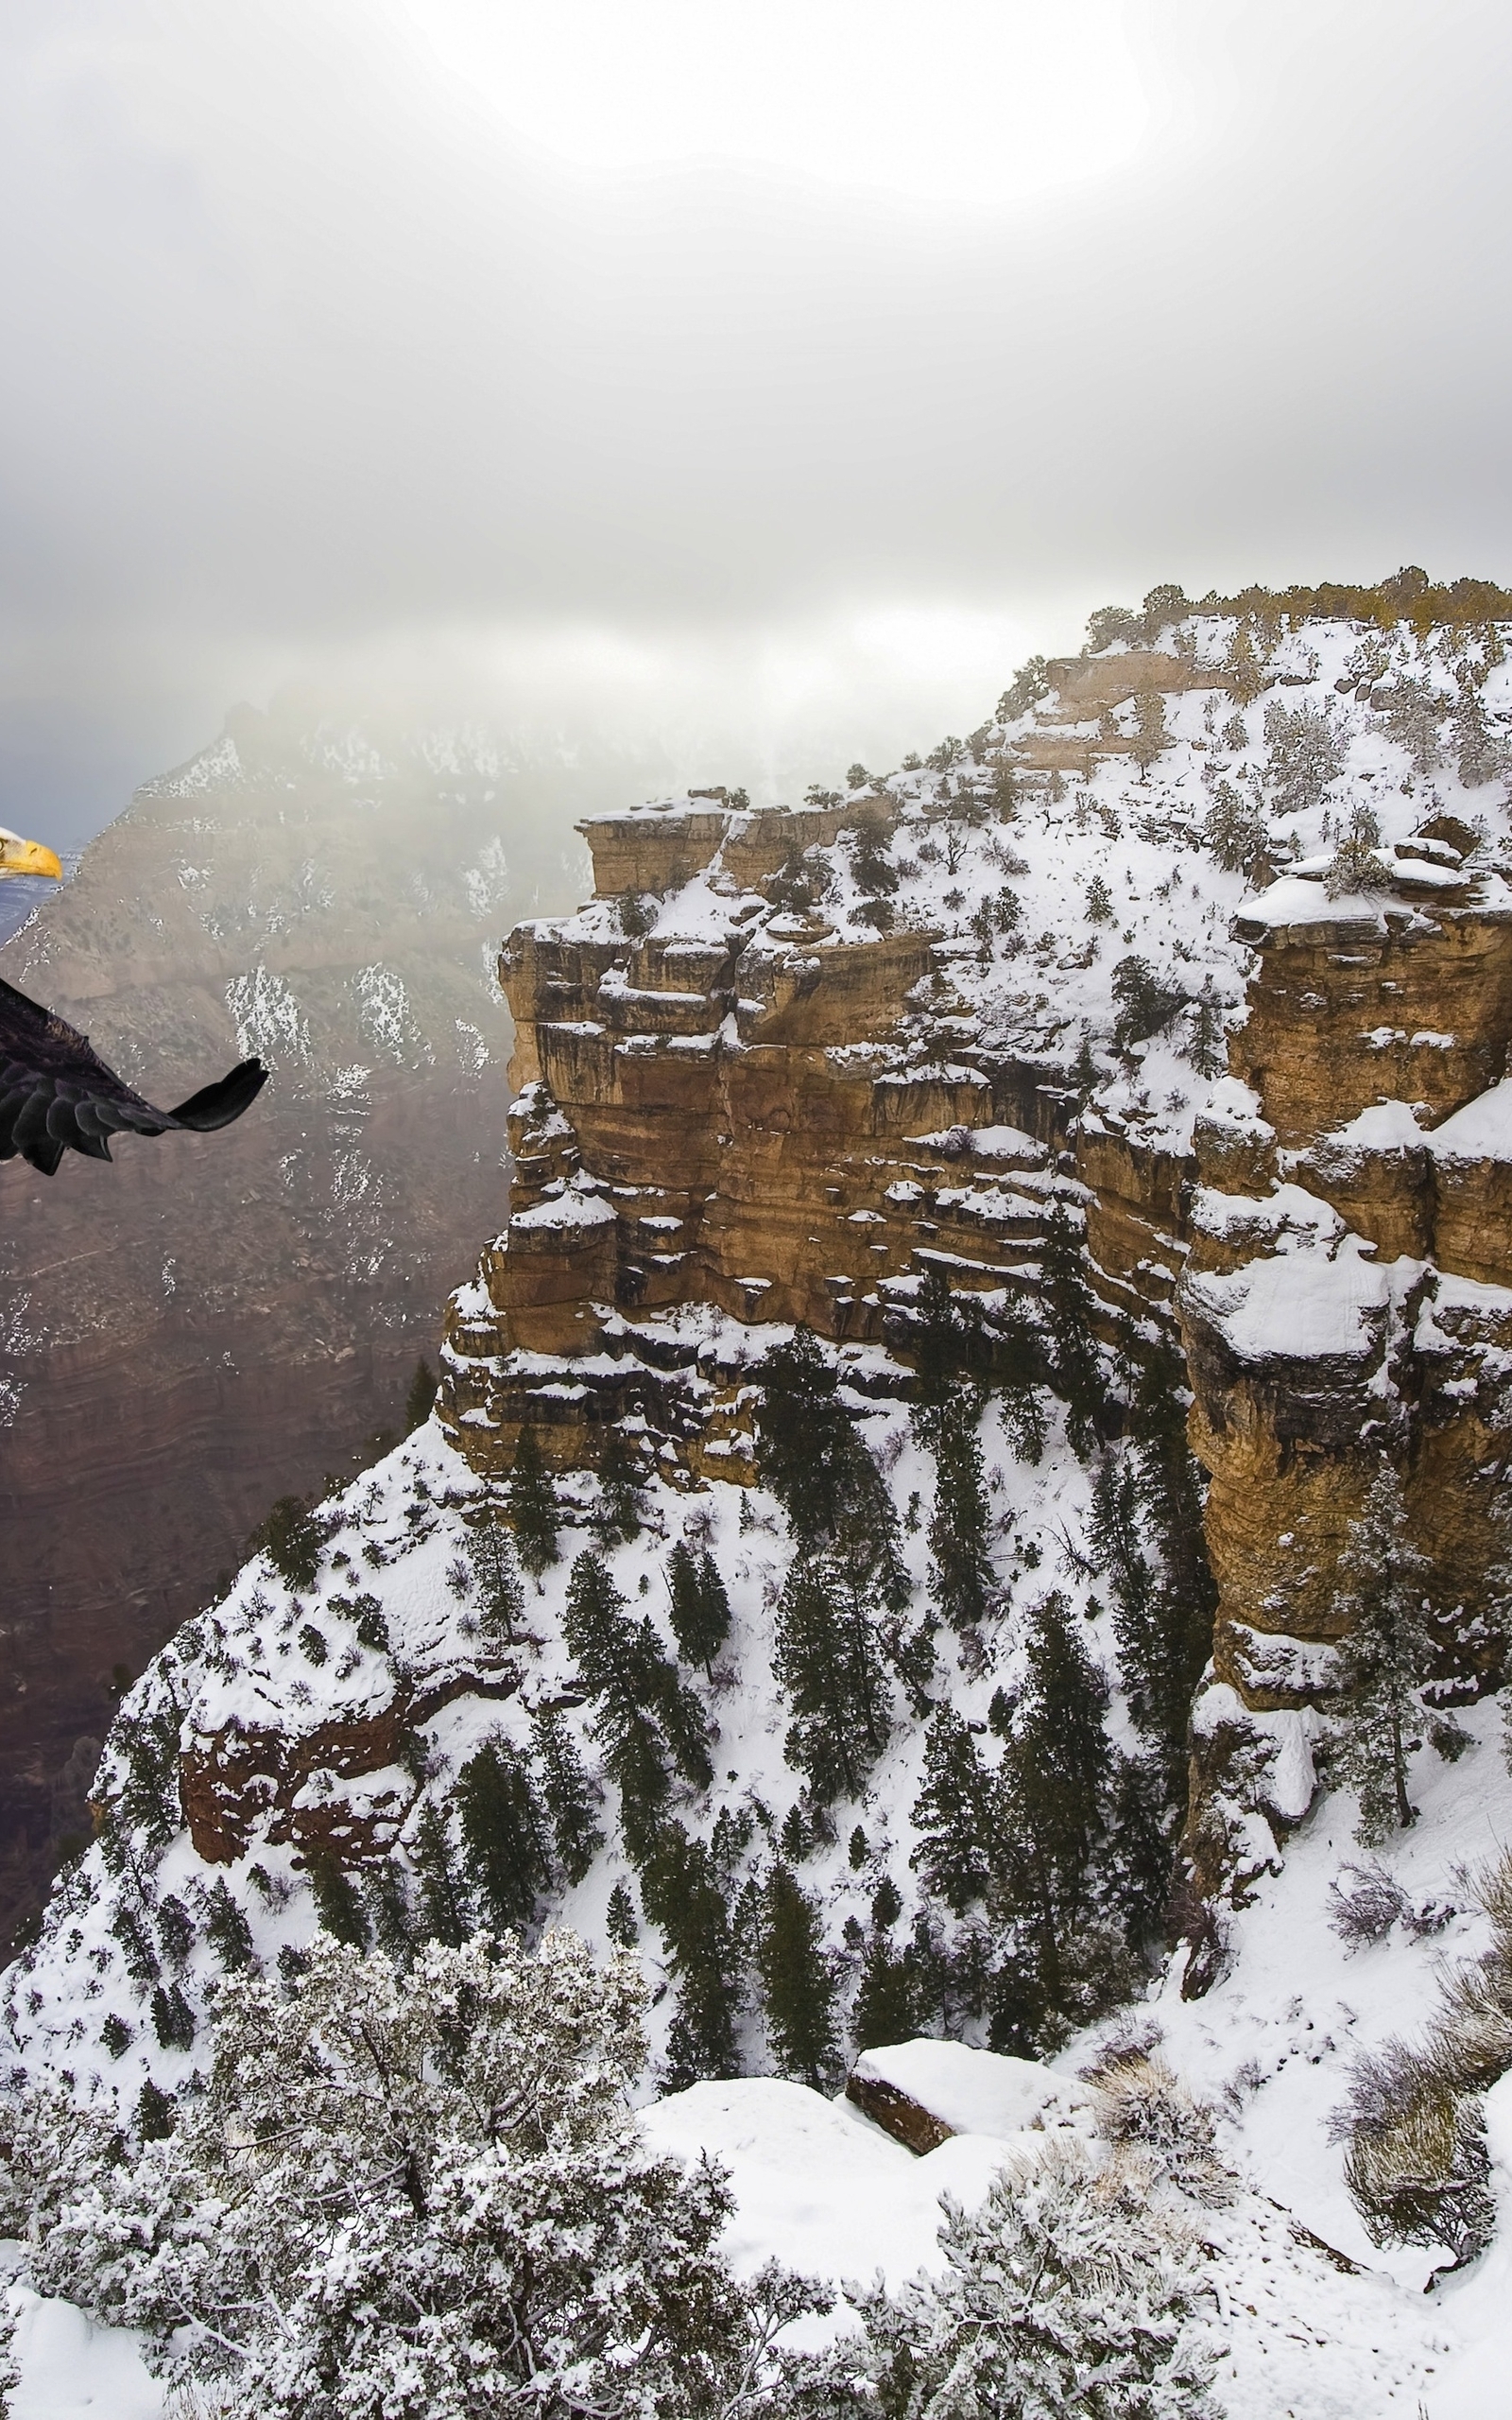 Image: Bald eagle, eagle, flying, wings, mountains, winter, snow, height, bird, predator